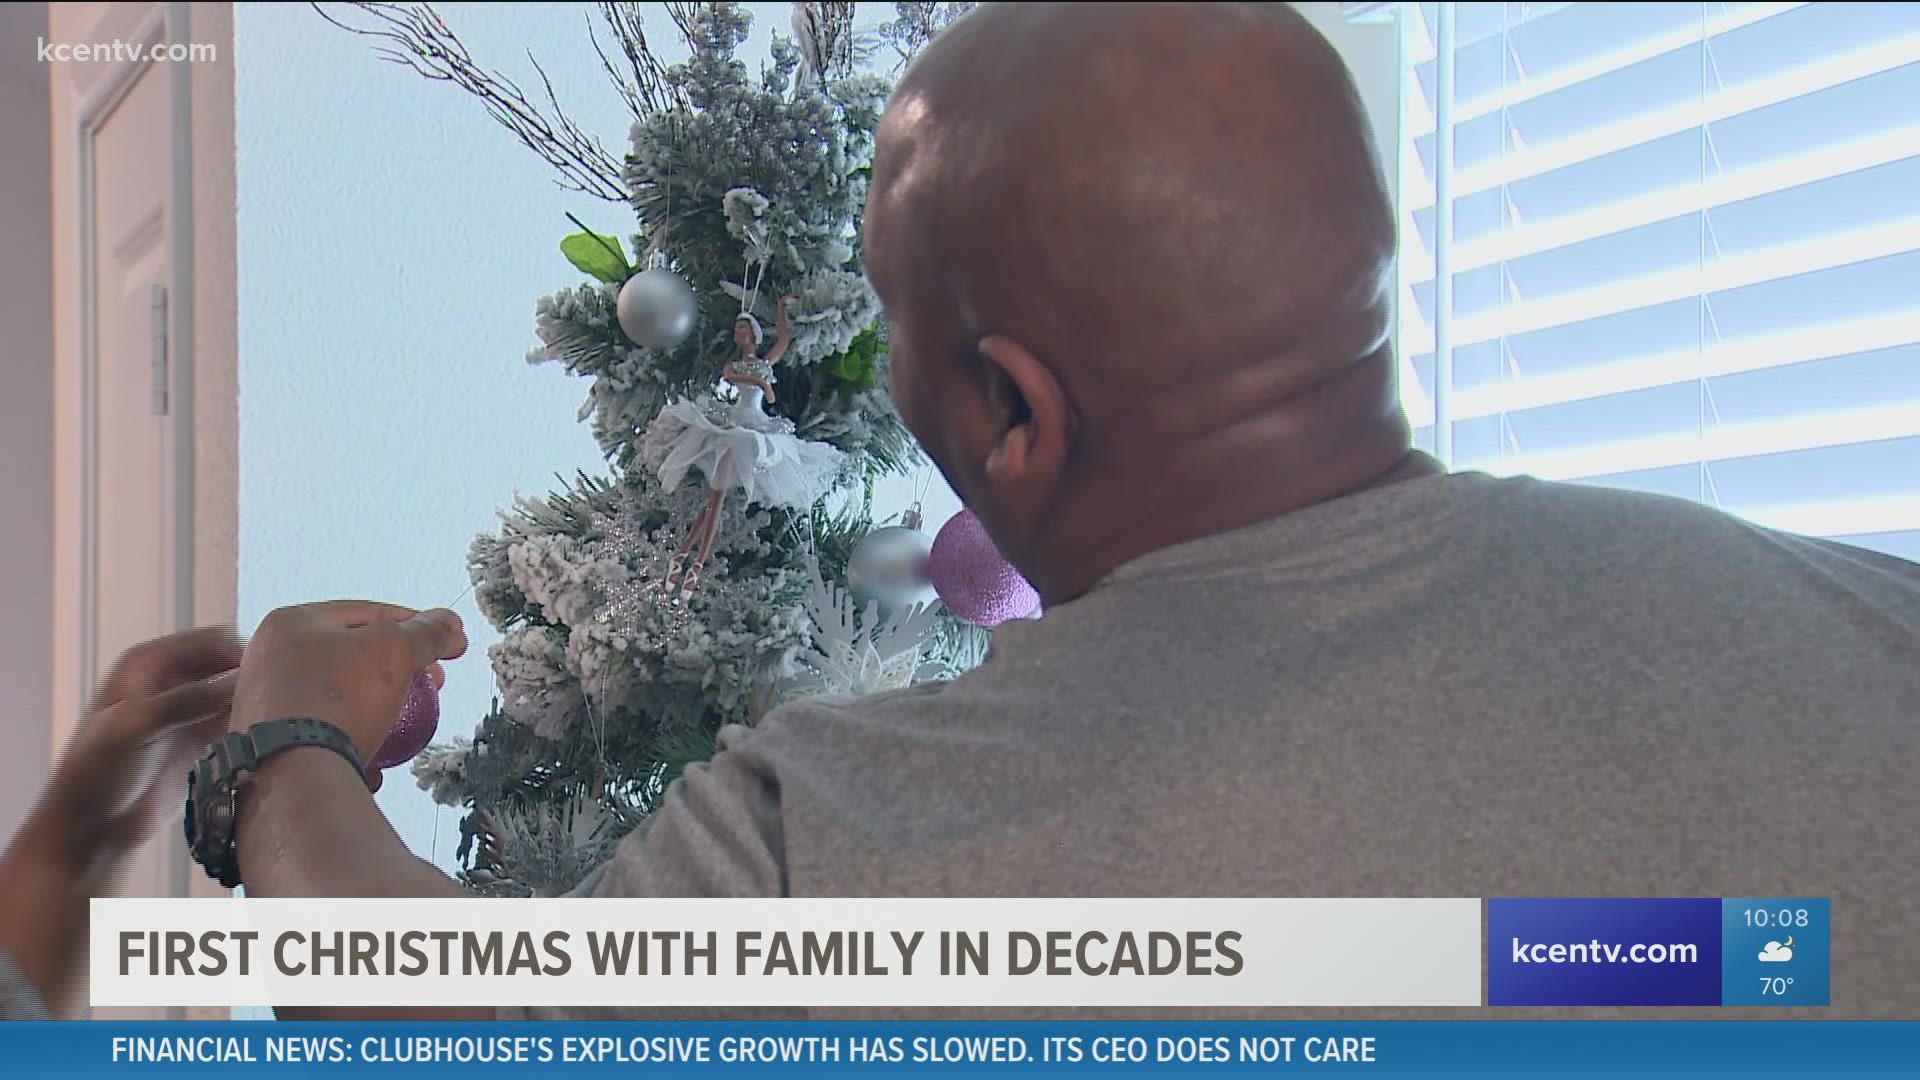 In North Texas, a convicted man on a mission to clear his name is getting to spend his first Christmas with family in decades.